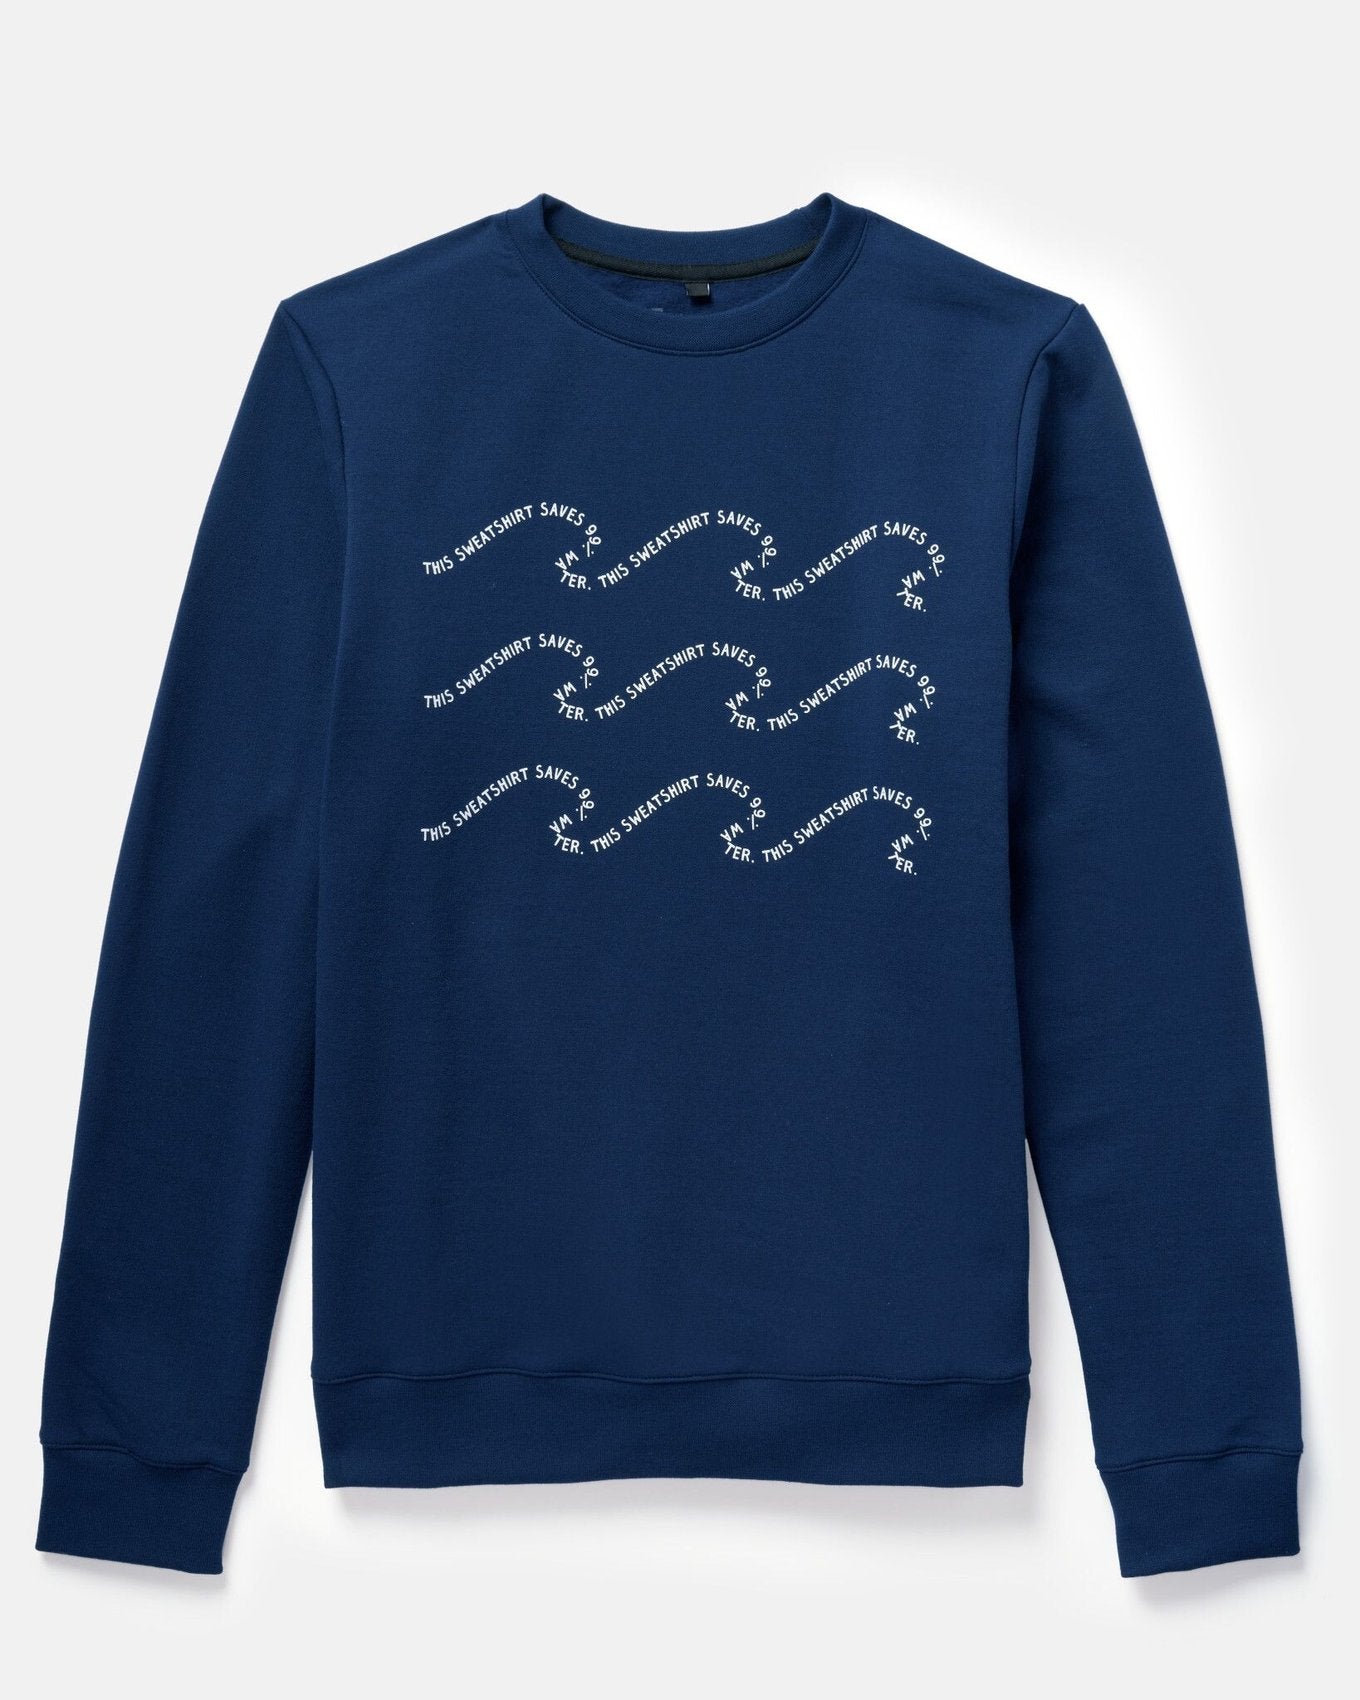 ReApparel Save Crew Neck . in color Navy Blue and shape long sleeve